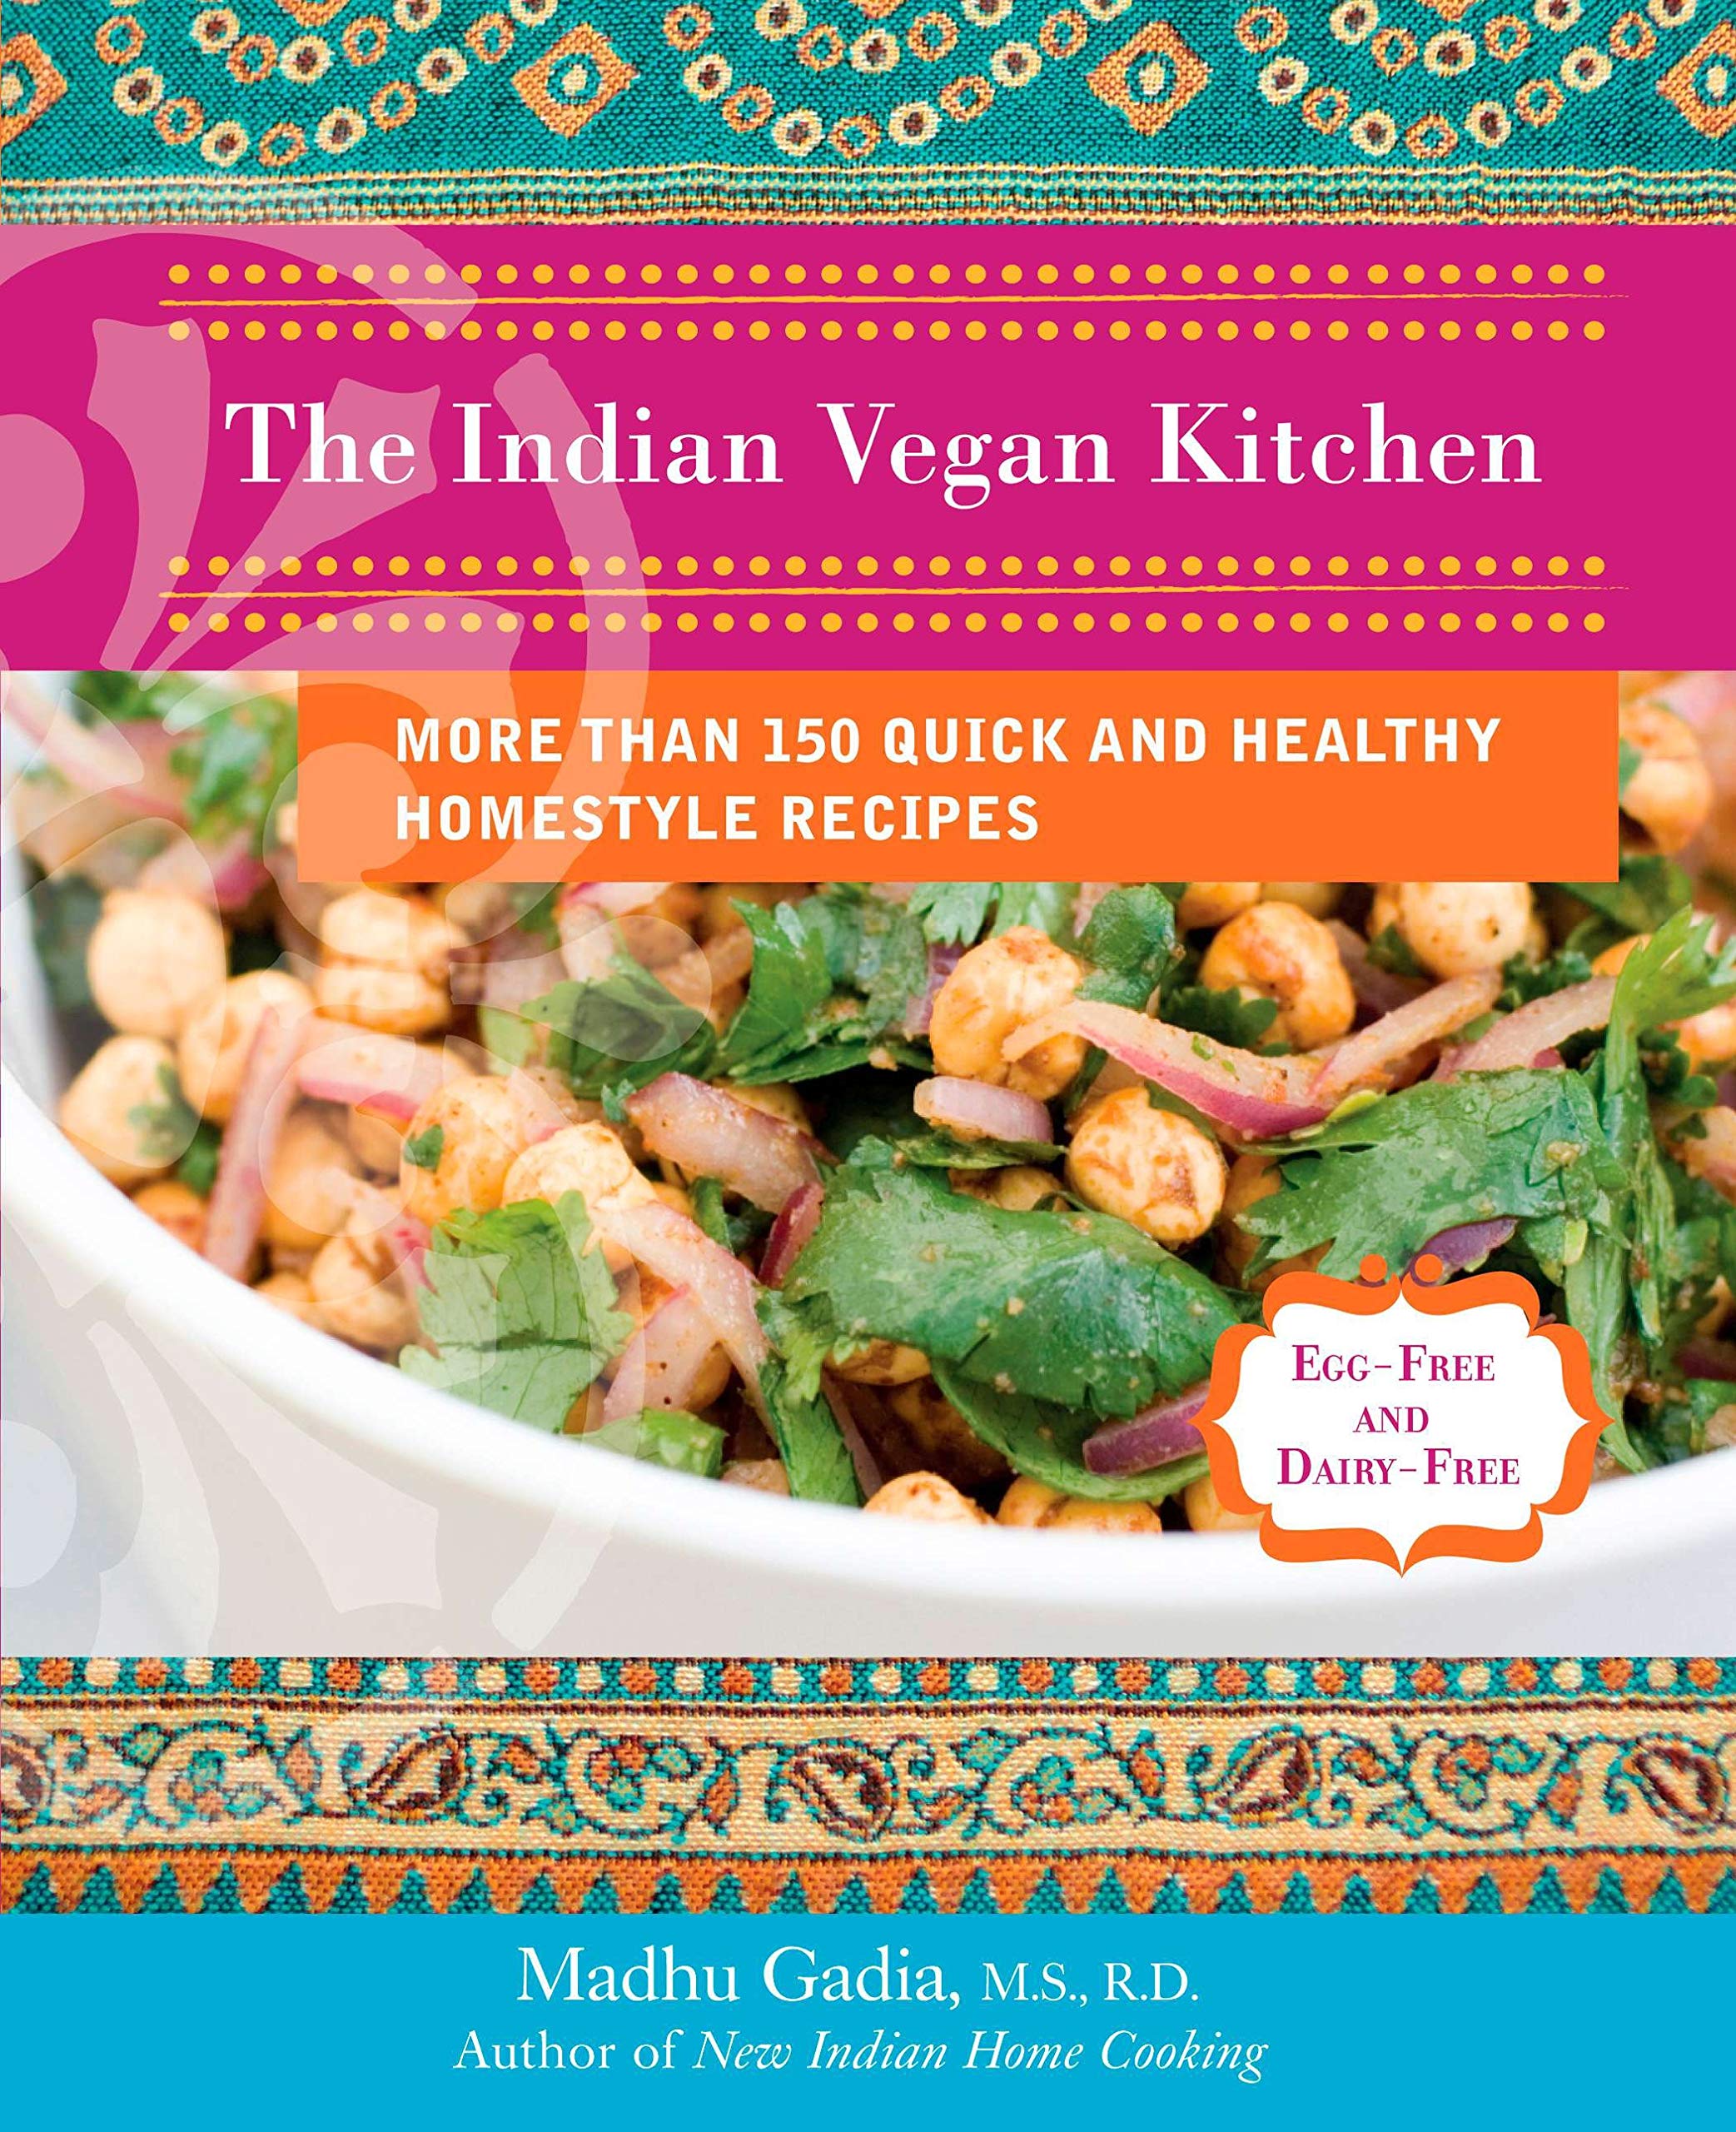 The Indian Vegan Kitchen: More Than 150 Quick and Healthy Homestyle Recipes (Madhu Gadia)